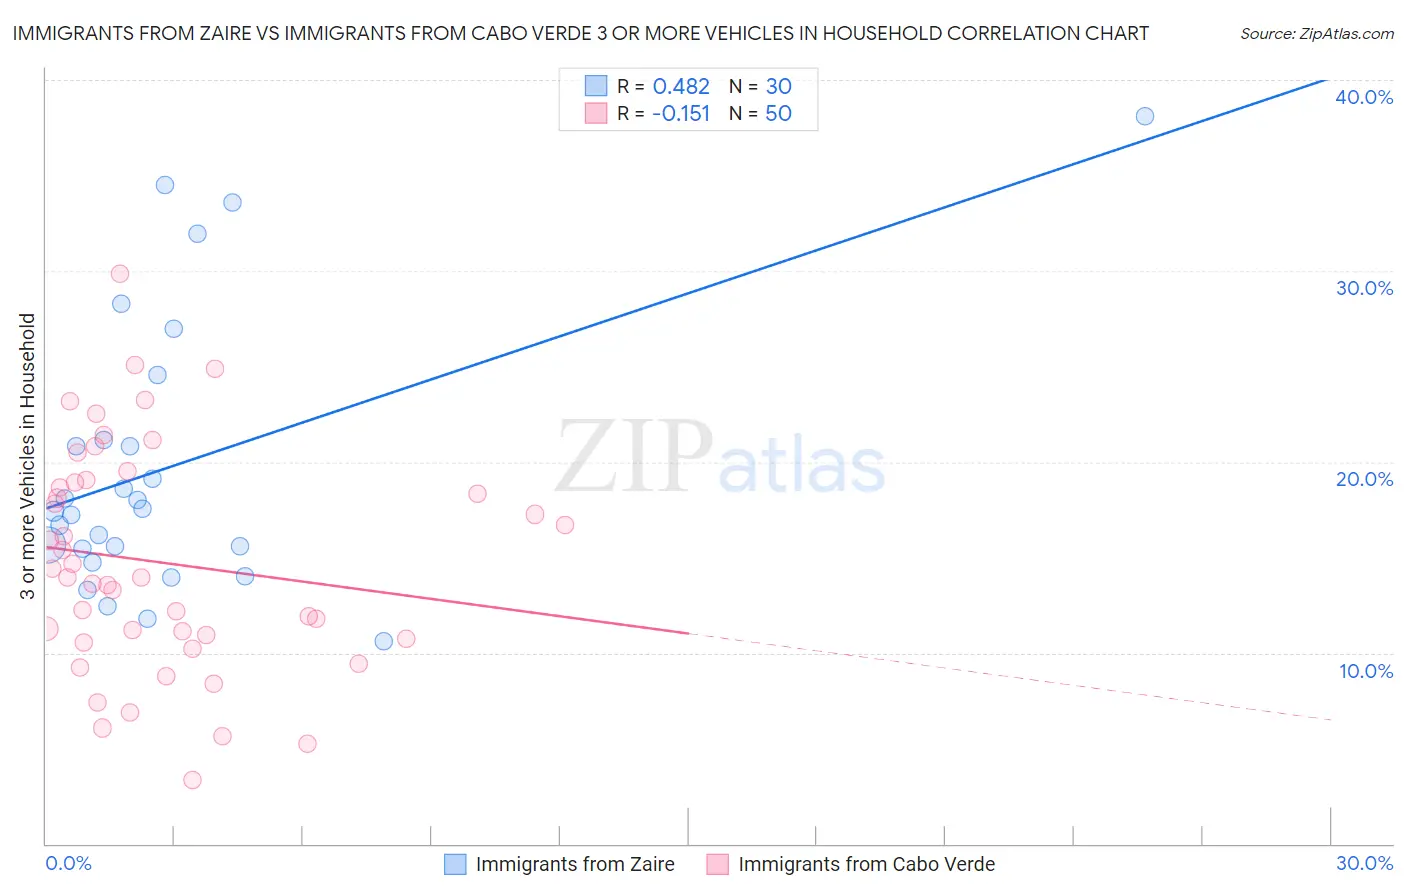 Immigrants from Zaire vs Immigrants from Cabo Verde 3 or more Vehicles in Household